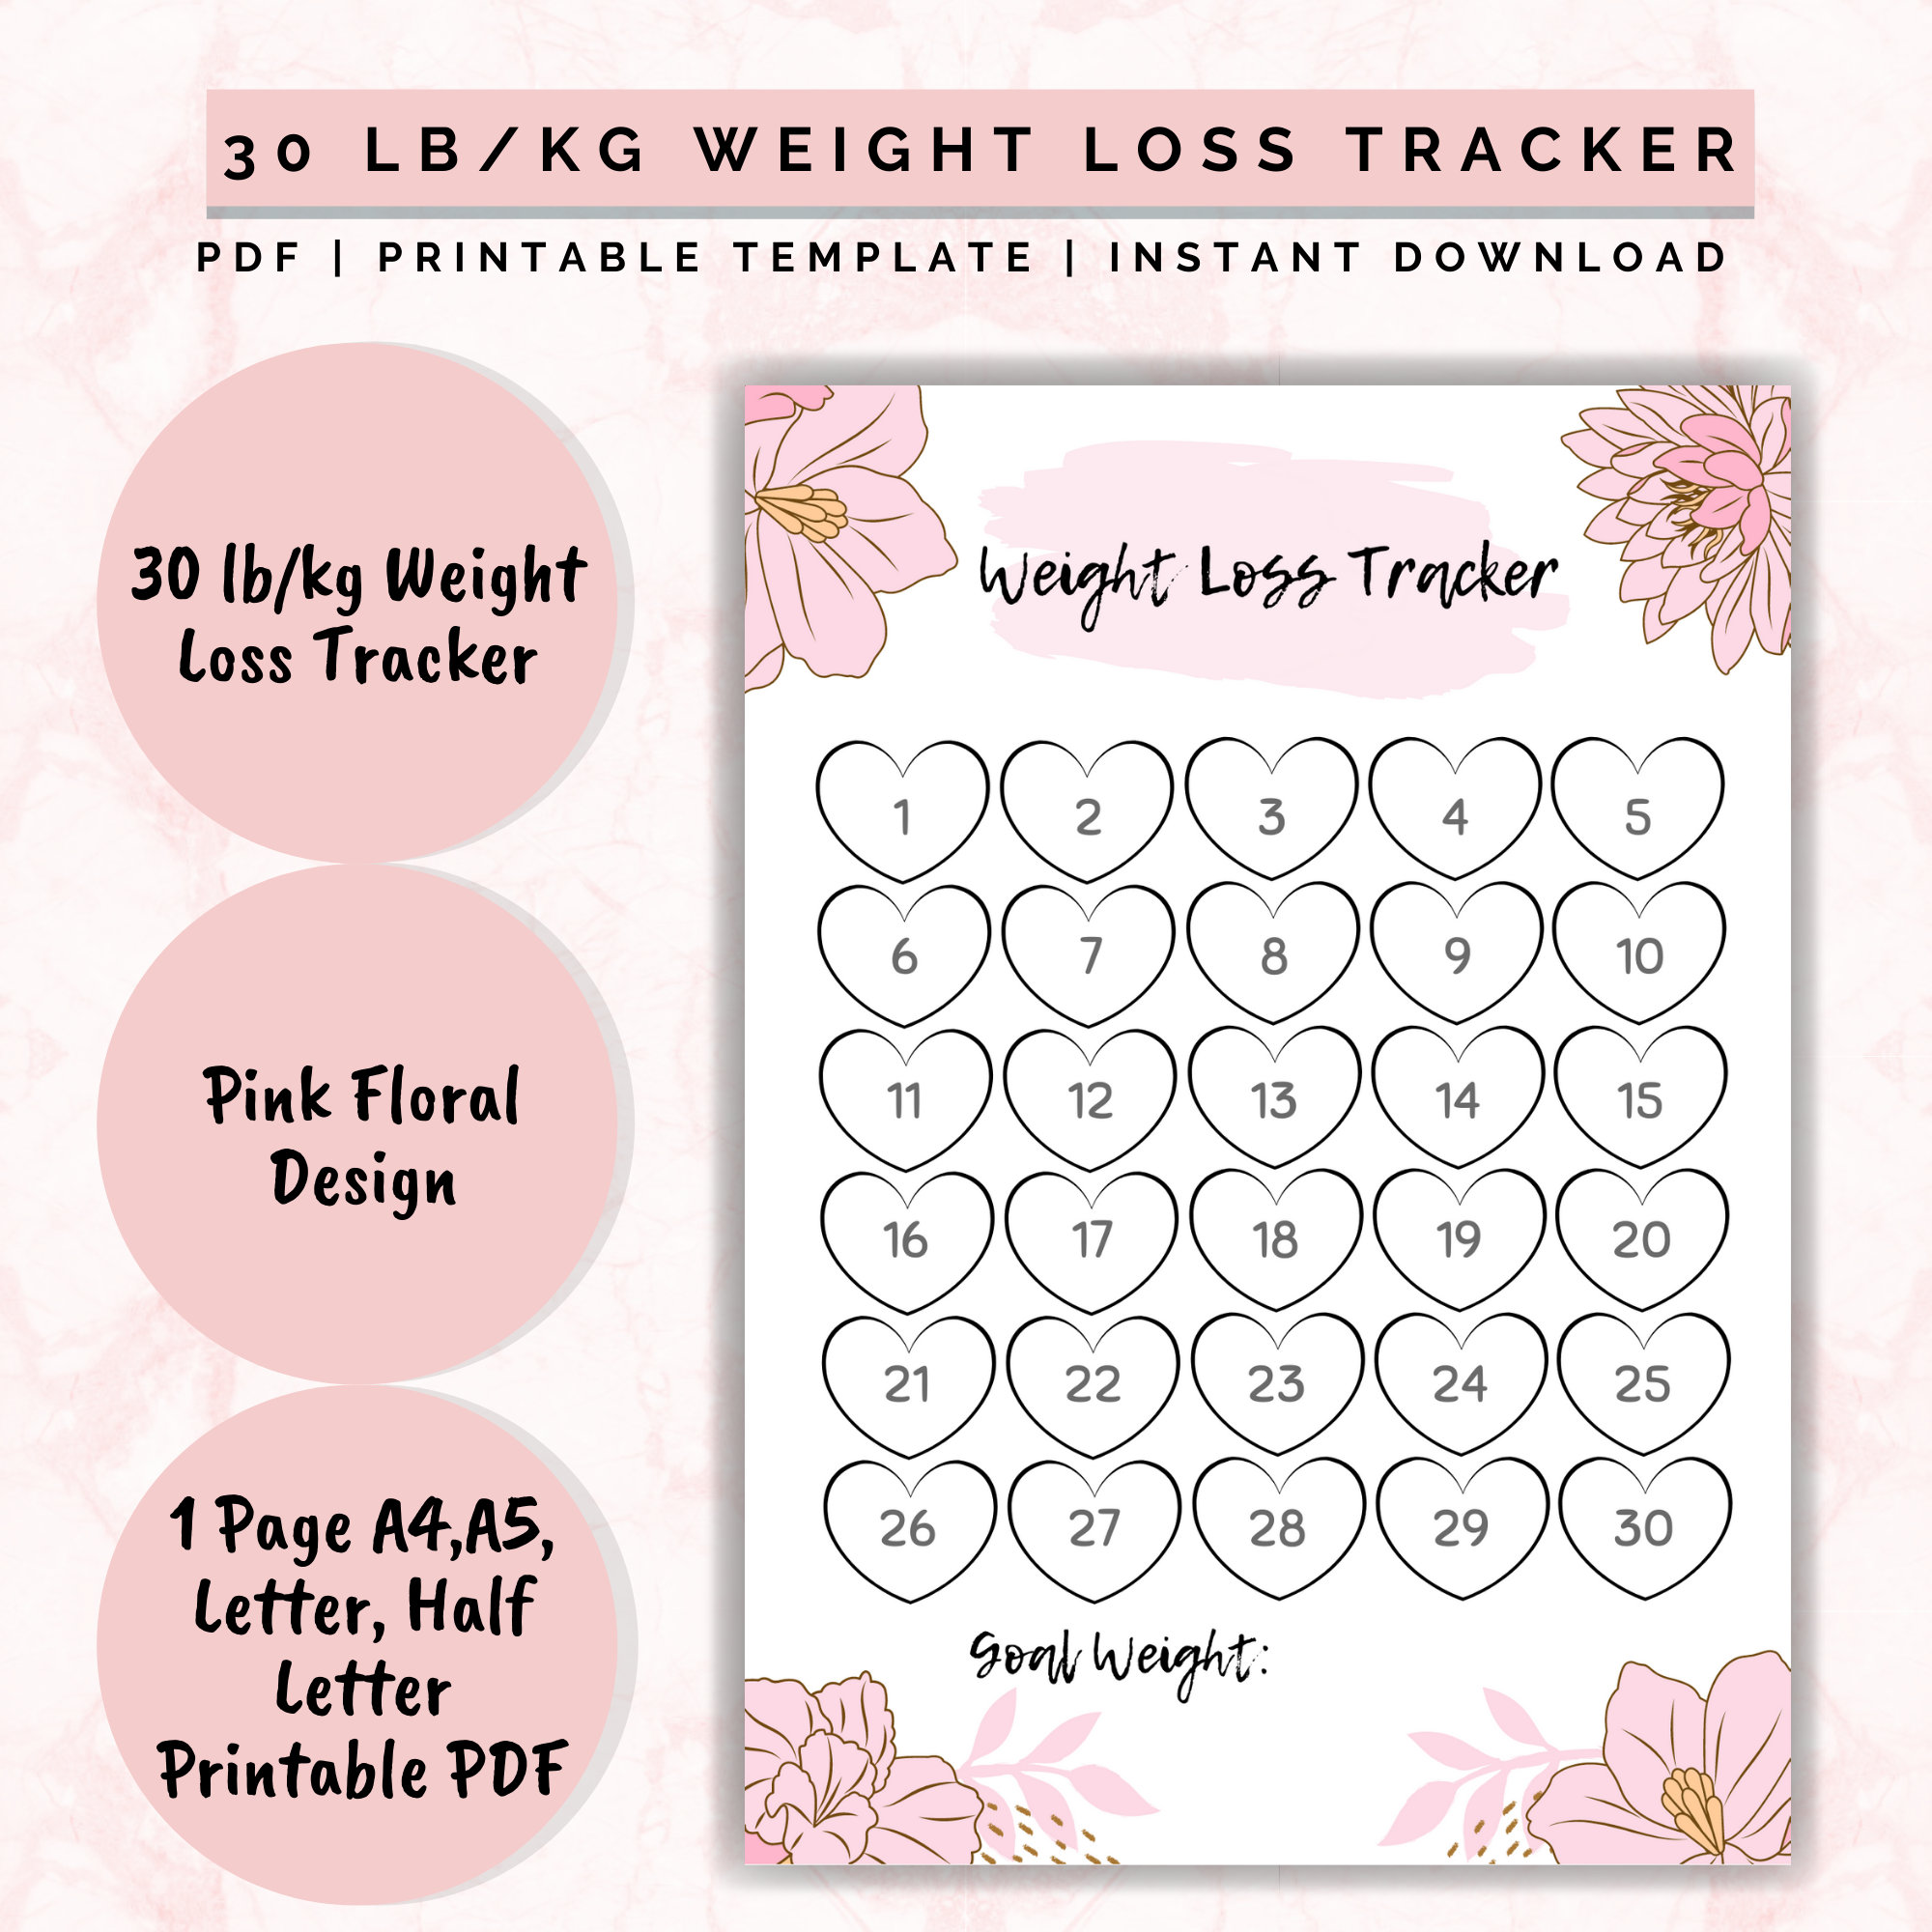 weight-loss-tracker-printable-30-lb-kg-weight-loss-chart-etsy